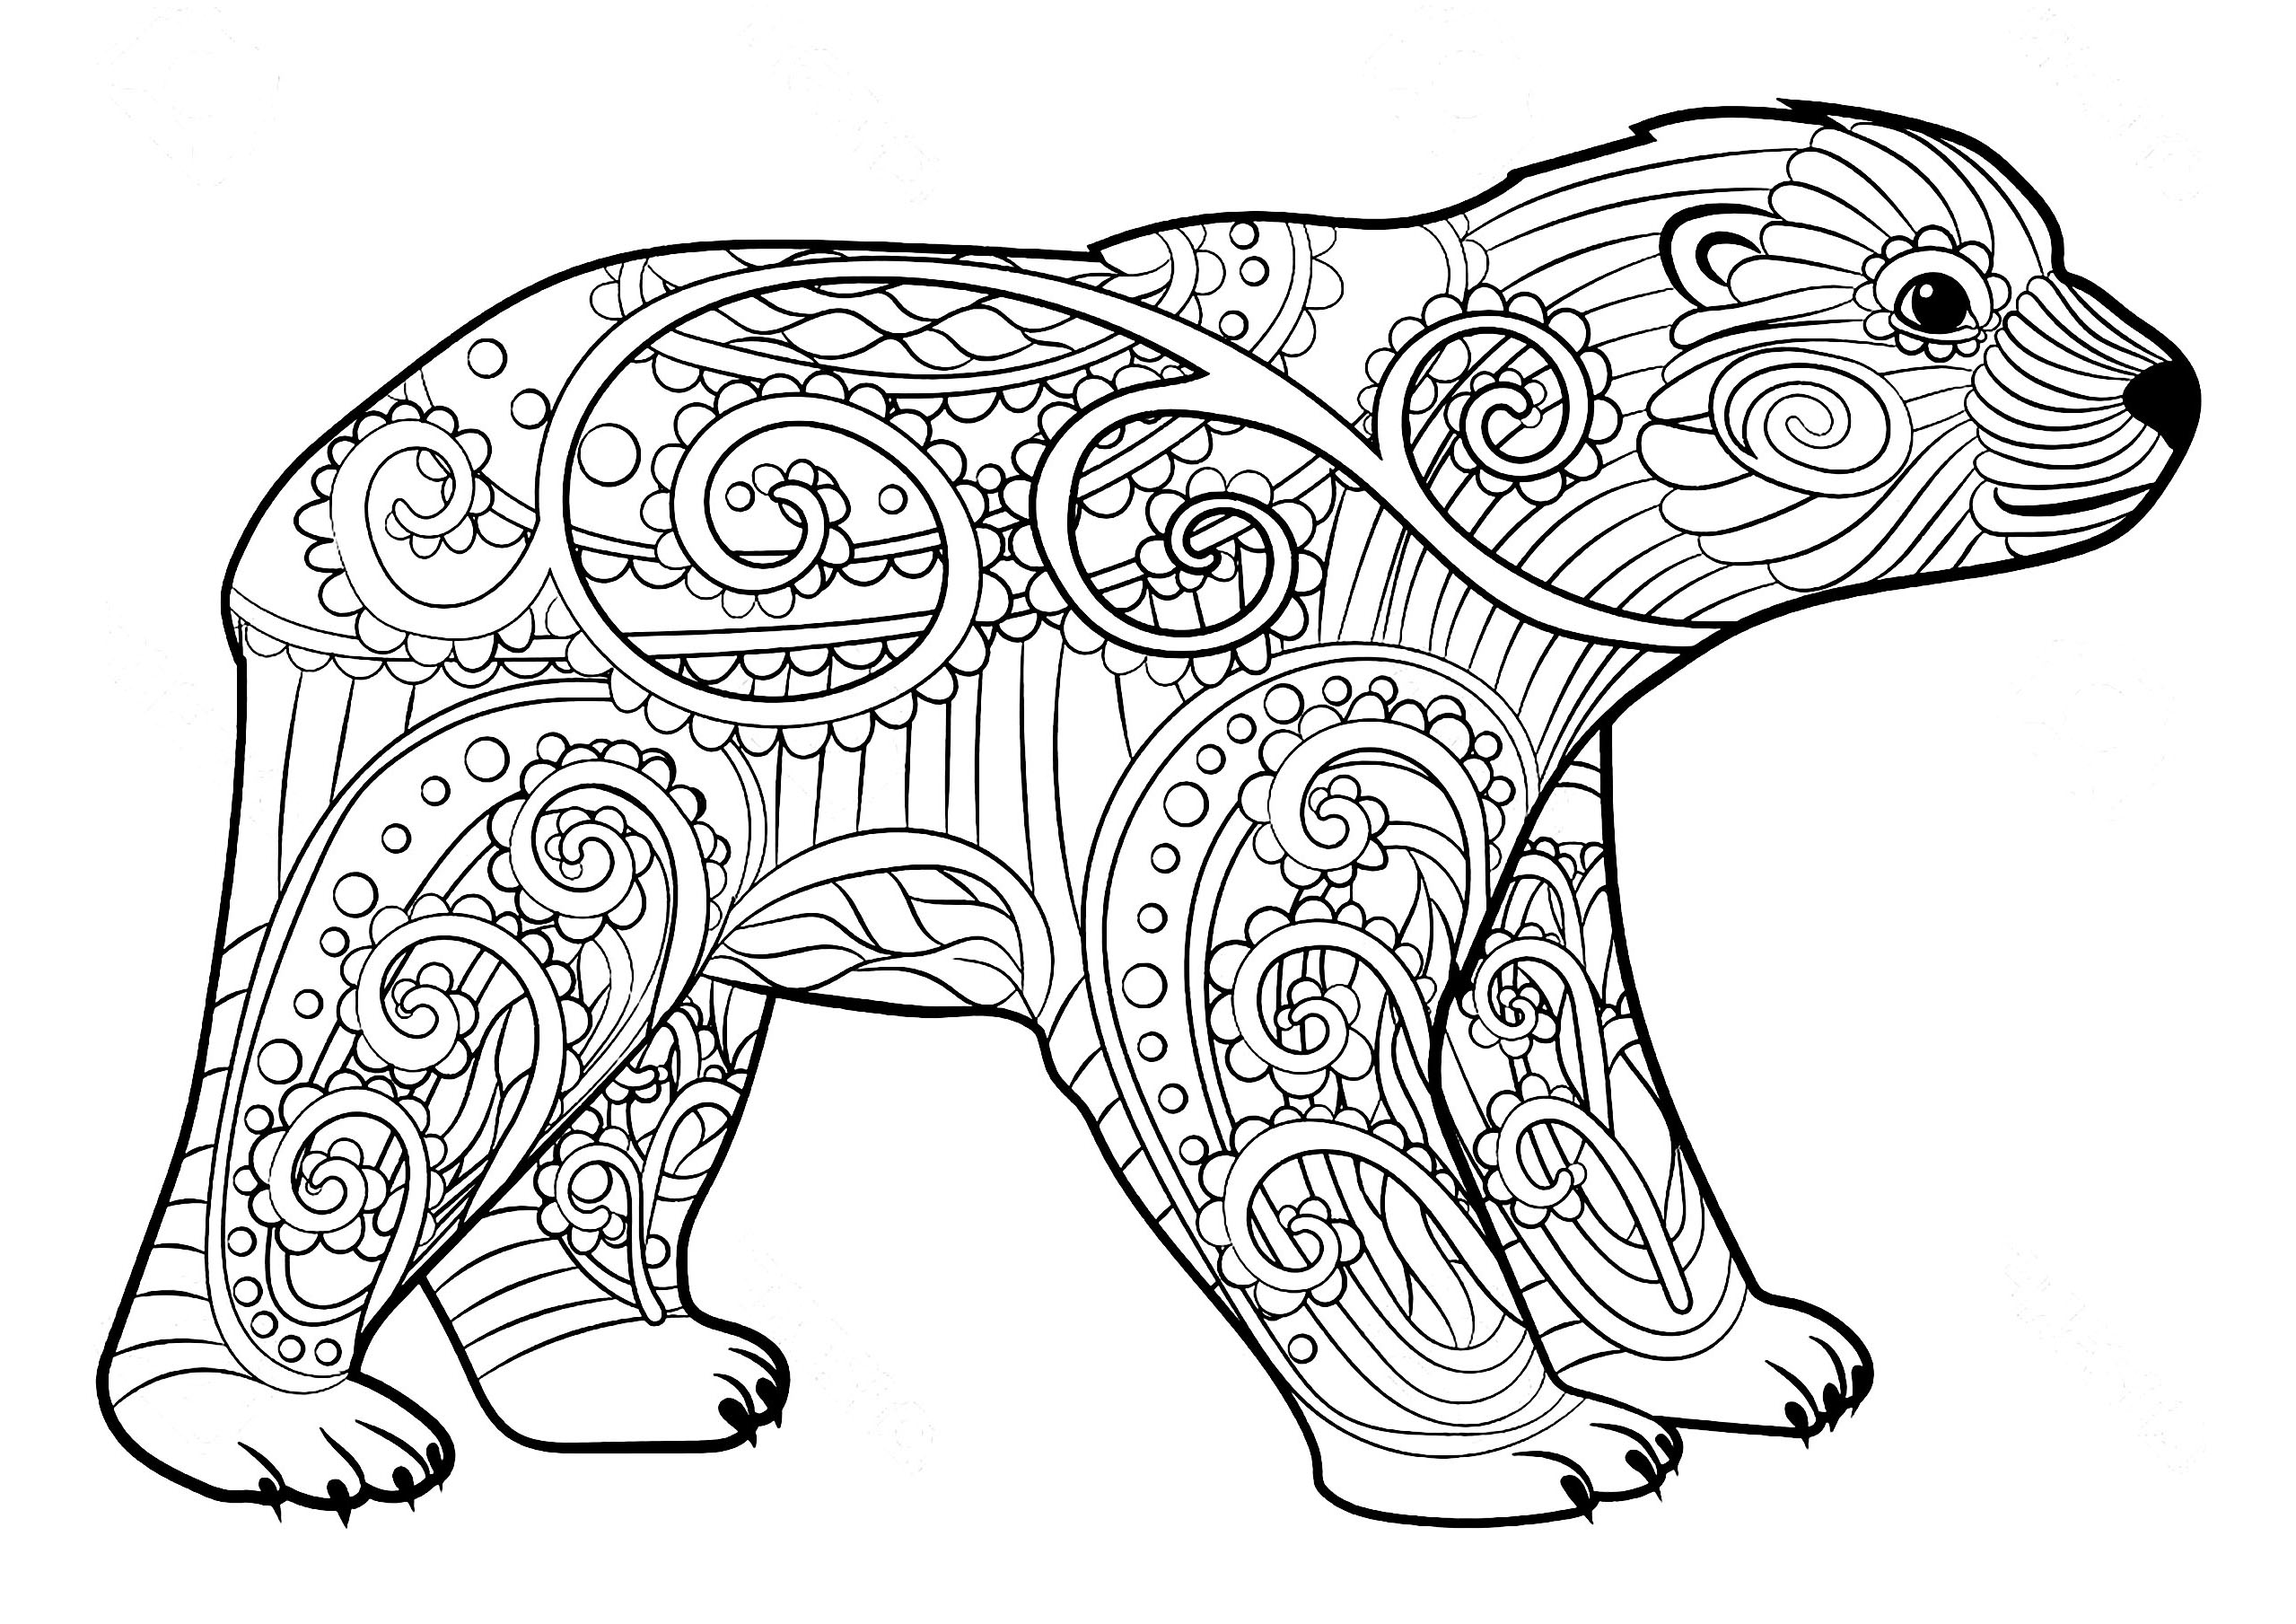 Young Bear and motifs - Bears and Cubs Kids Coloring Pages - Page img ...